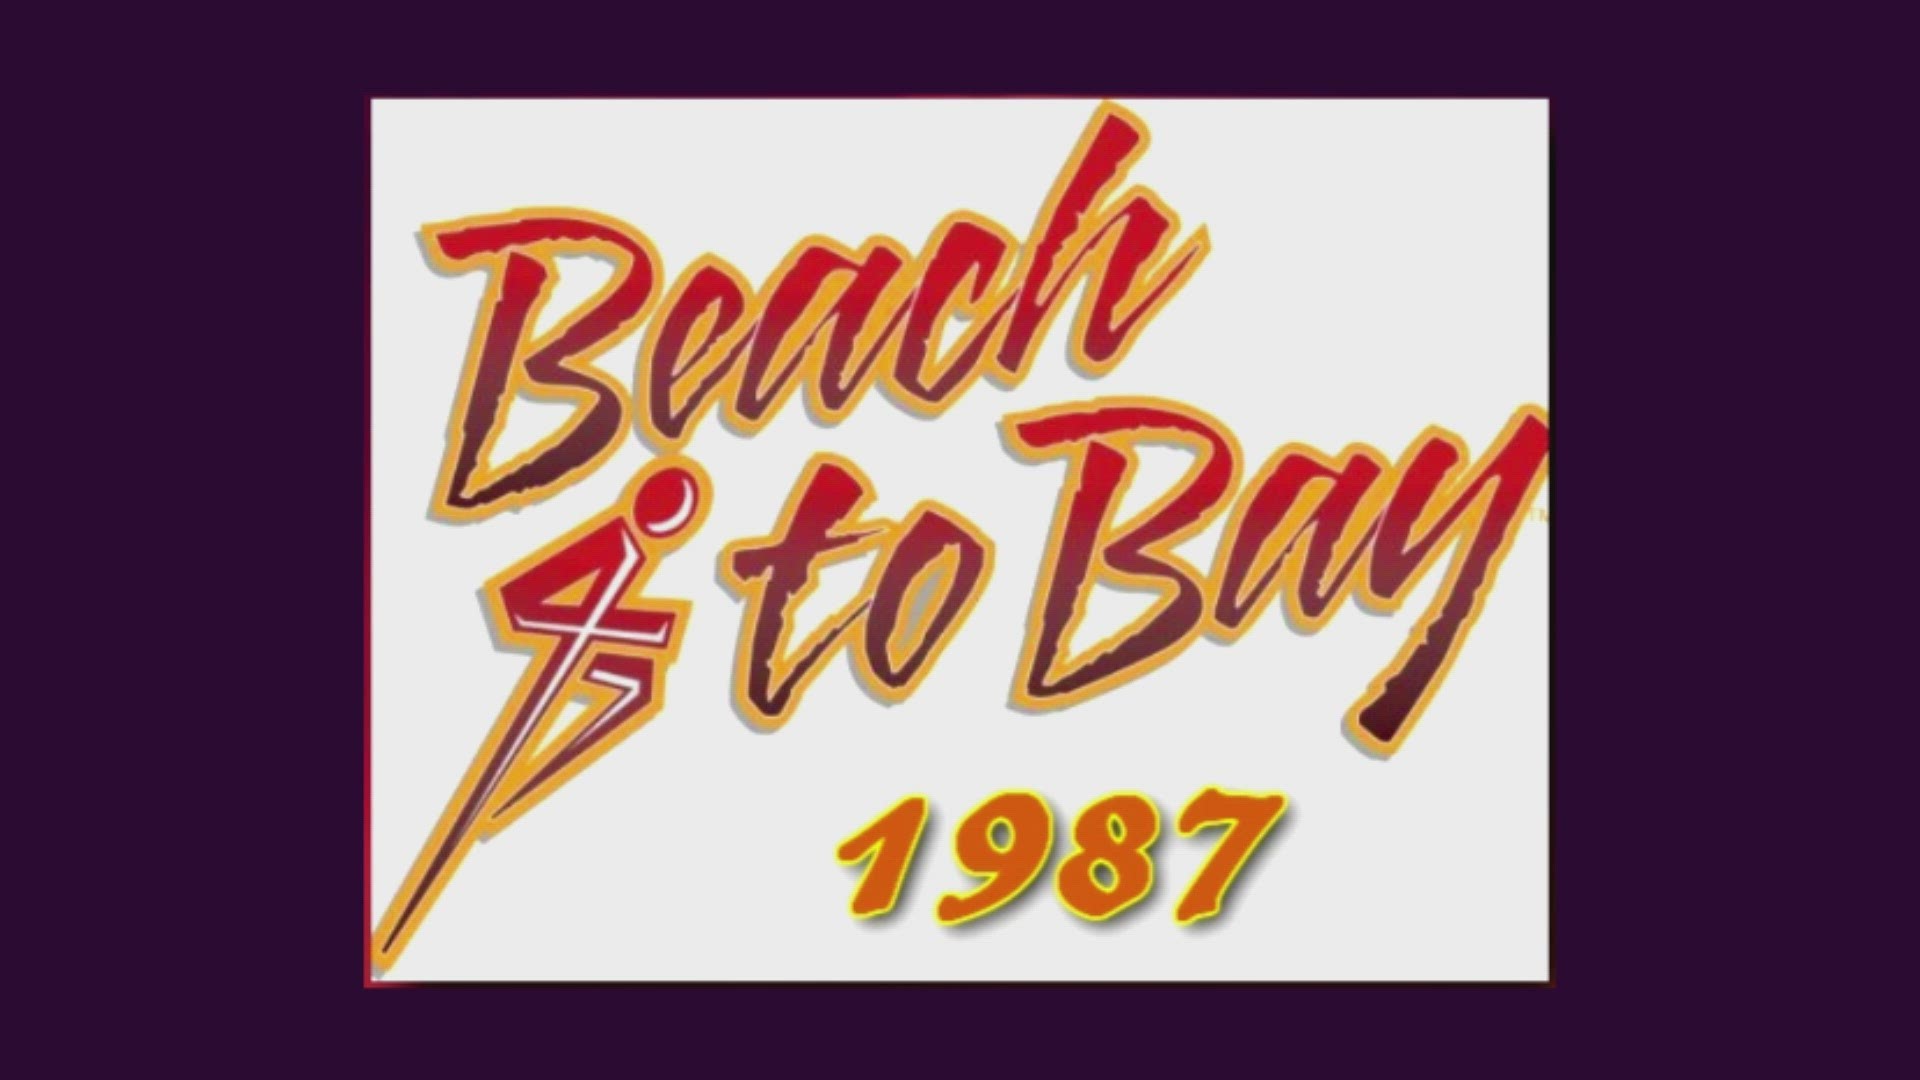 Here is a Throwback Thursday for you! Runners gather for Beach to Bay in Corpus Christi in 1987.